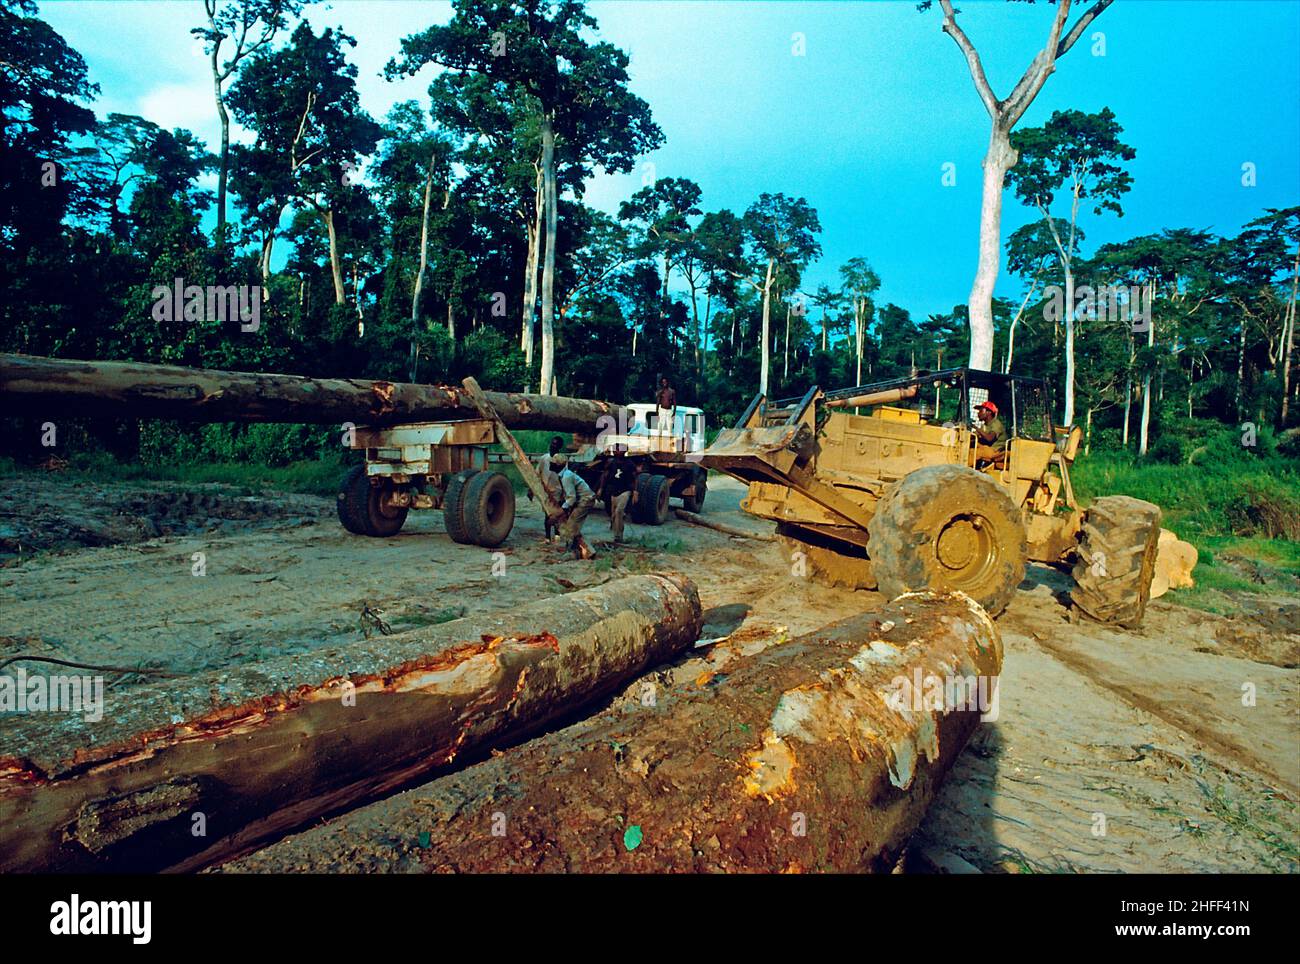 Lumber jacks lugging tree trunks out of the rainforest in Ghana, West Africa. Stock Photo